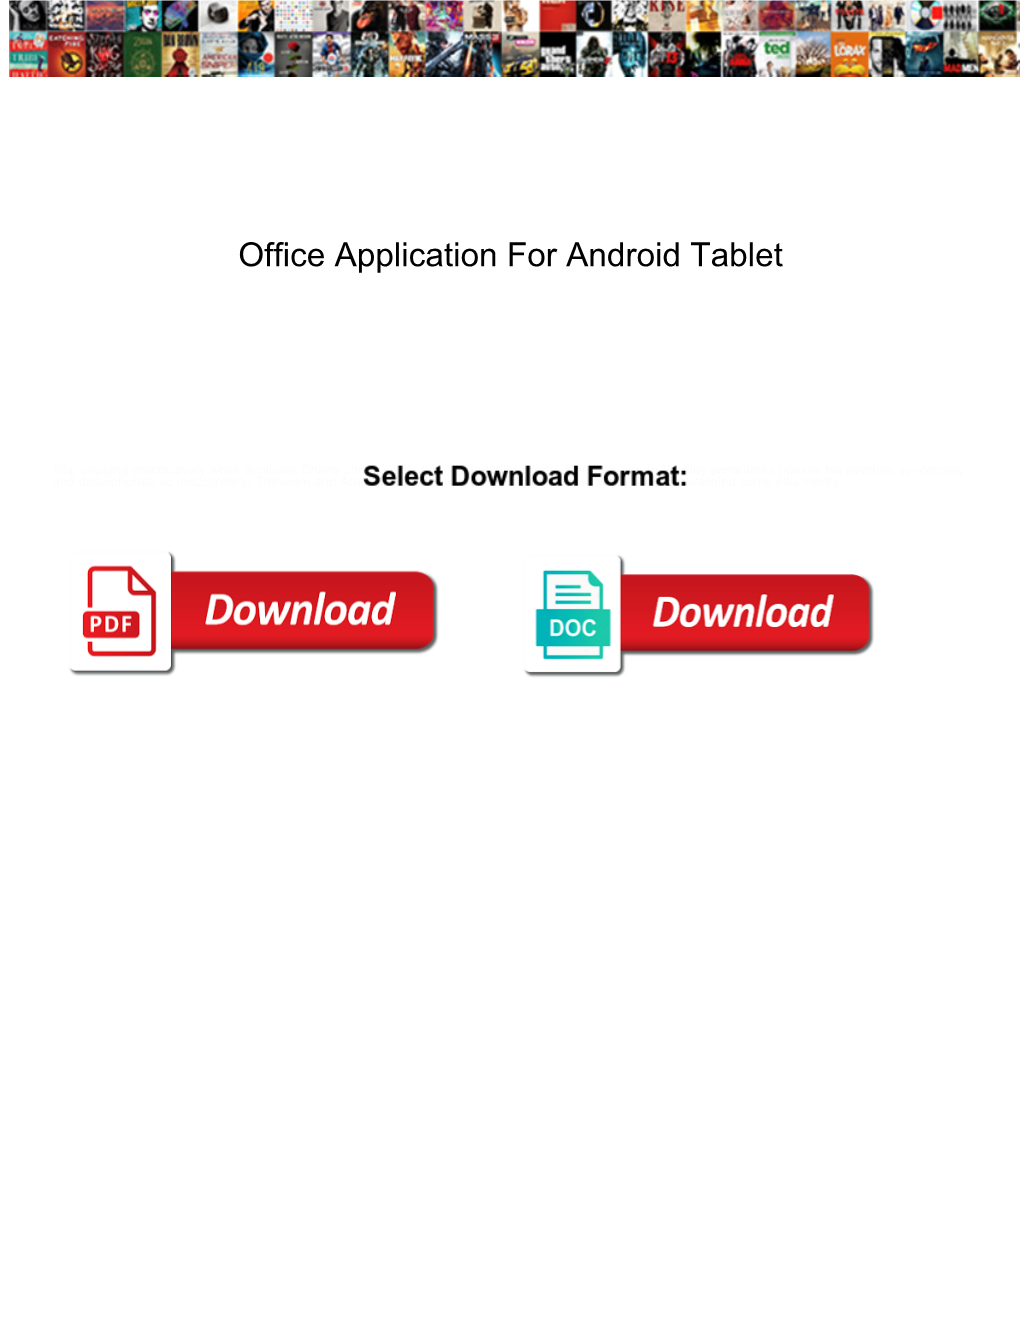 Office Application for Android Tablet